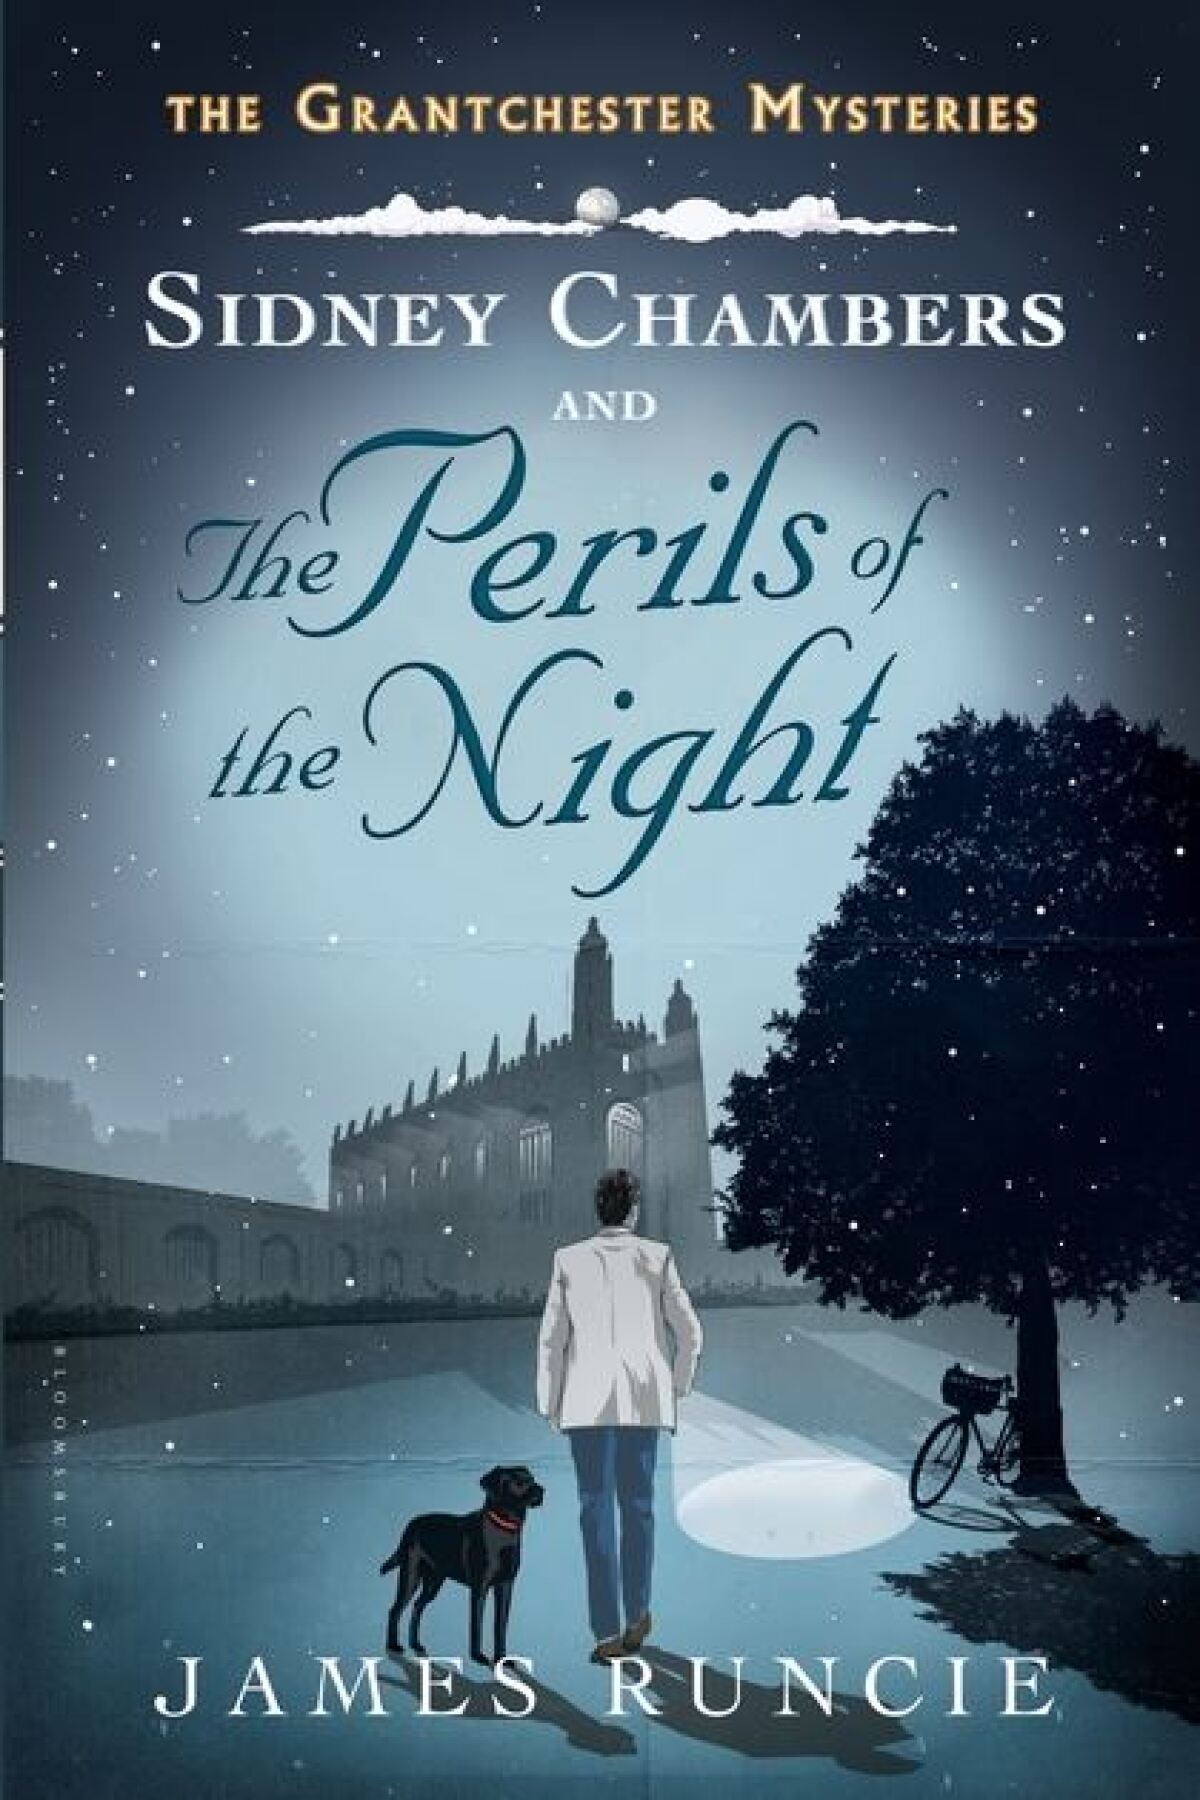 Book jacket for "Sidney Chambers and the Perils of the Night" by James Runcie.